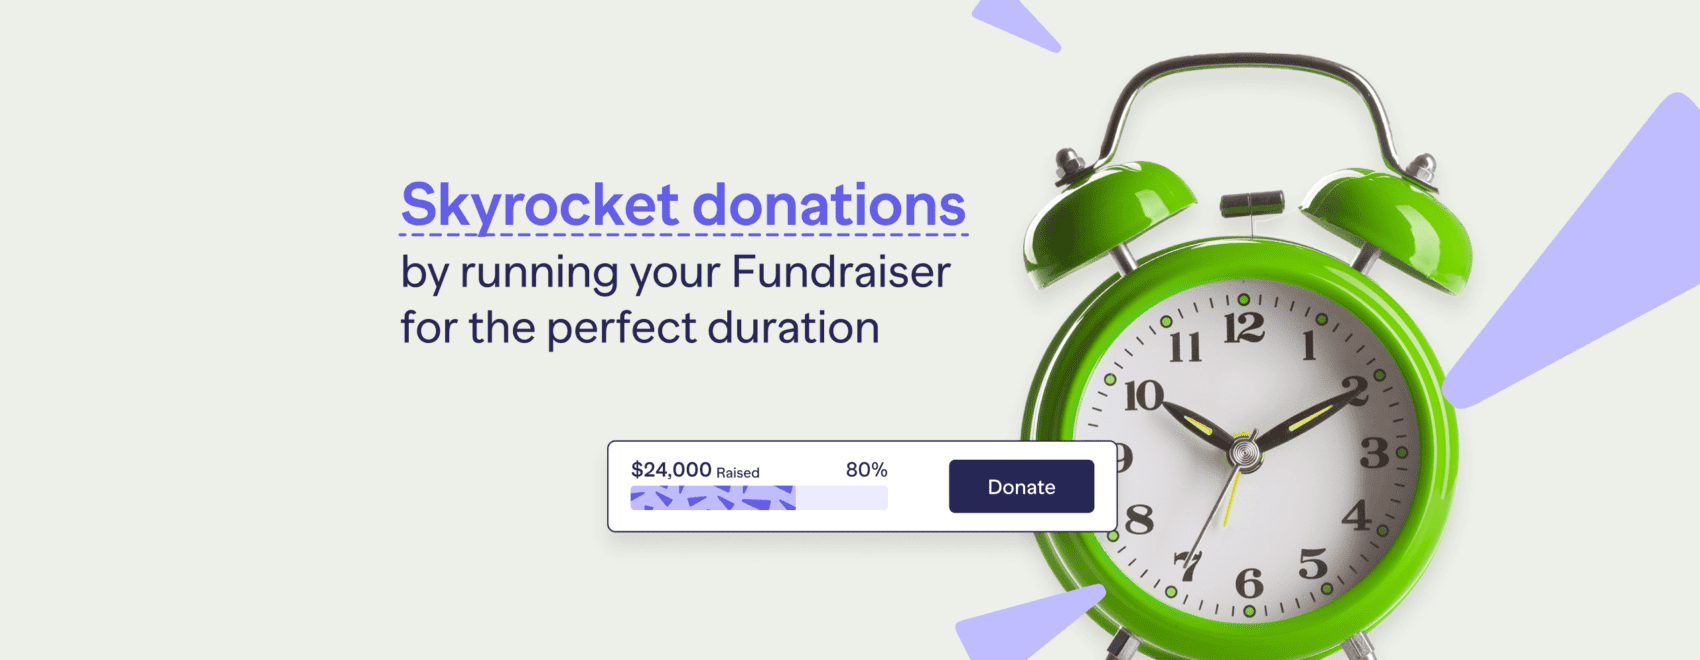 Skyrocket donations by running your Fundraiser for the perfect duration